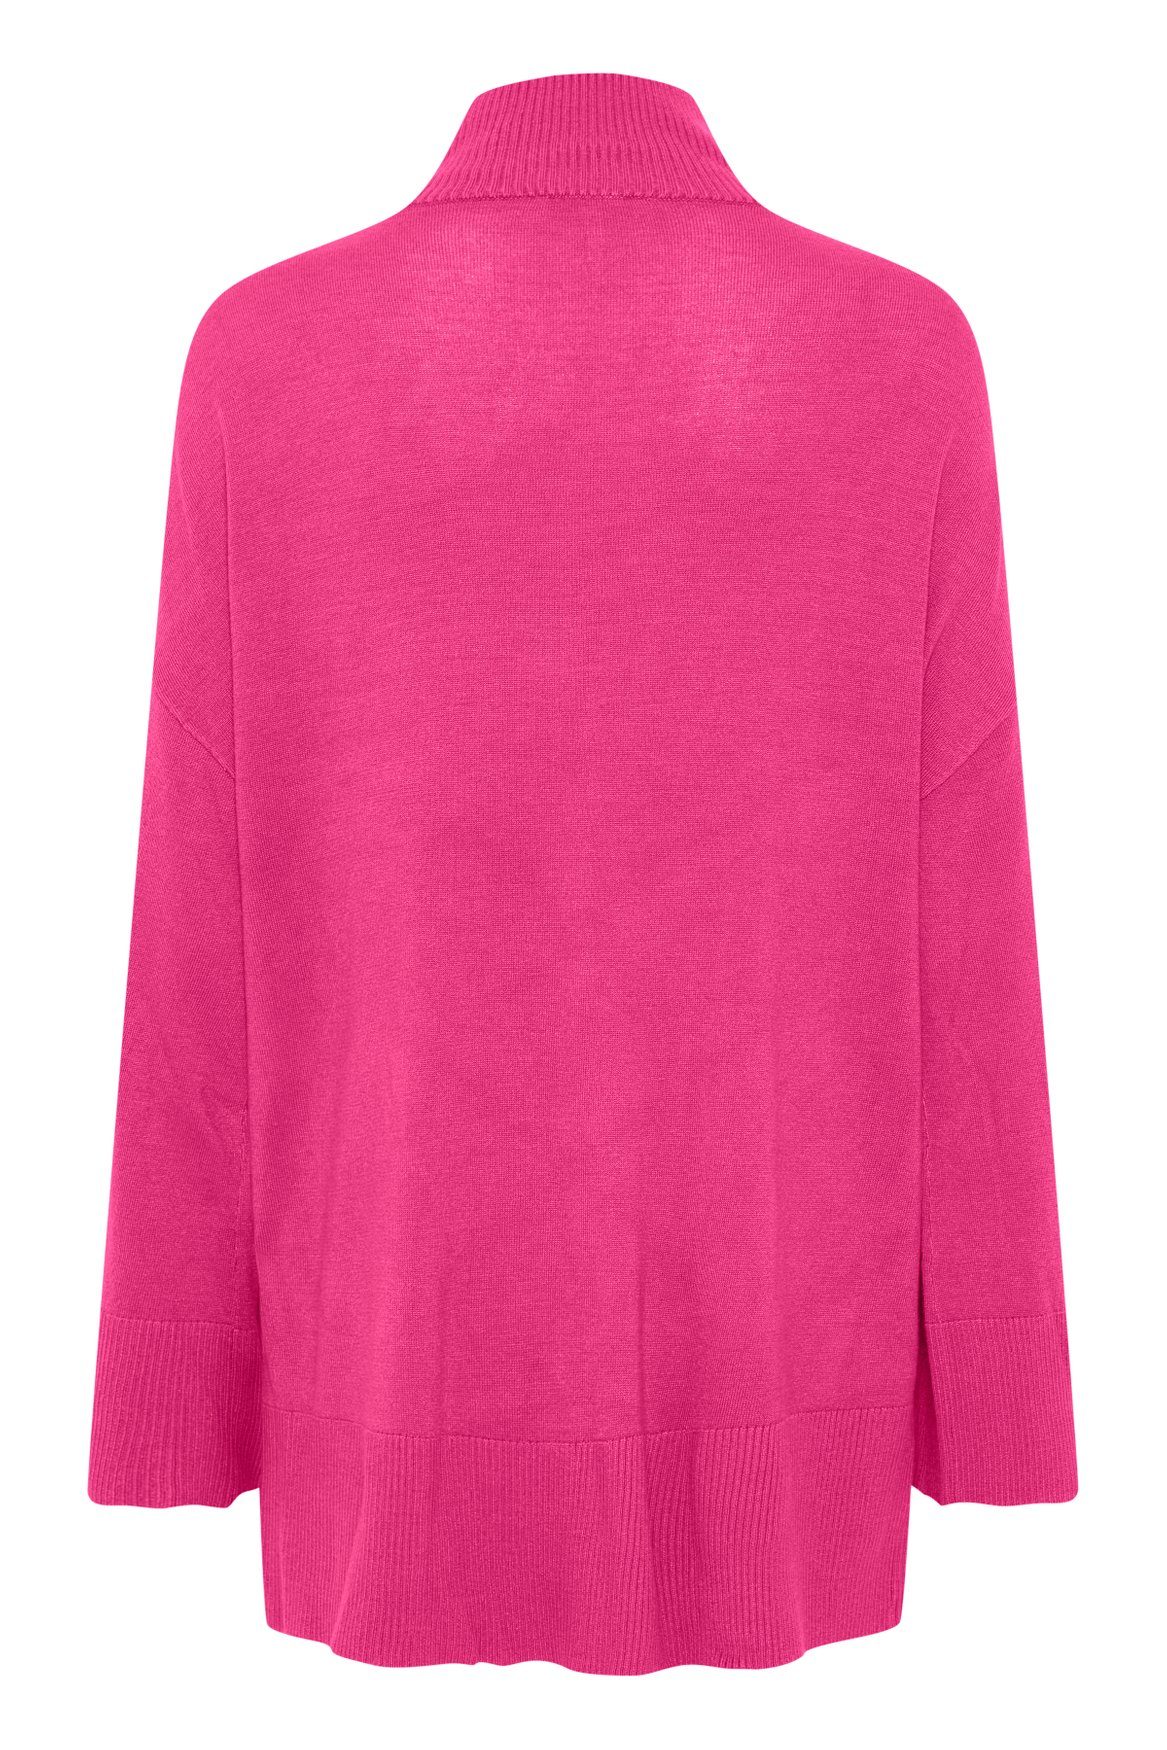 Feinstrick Langarm BYMMPIMBA1 Pink b.young 6263 Shirt in Pullover Strickpullover